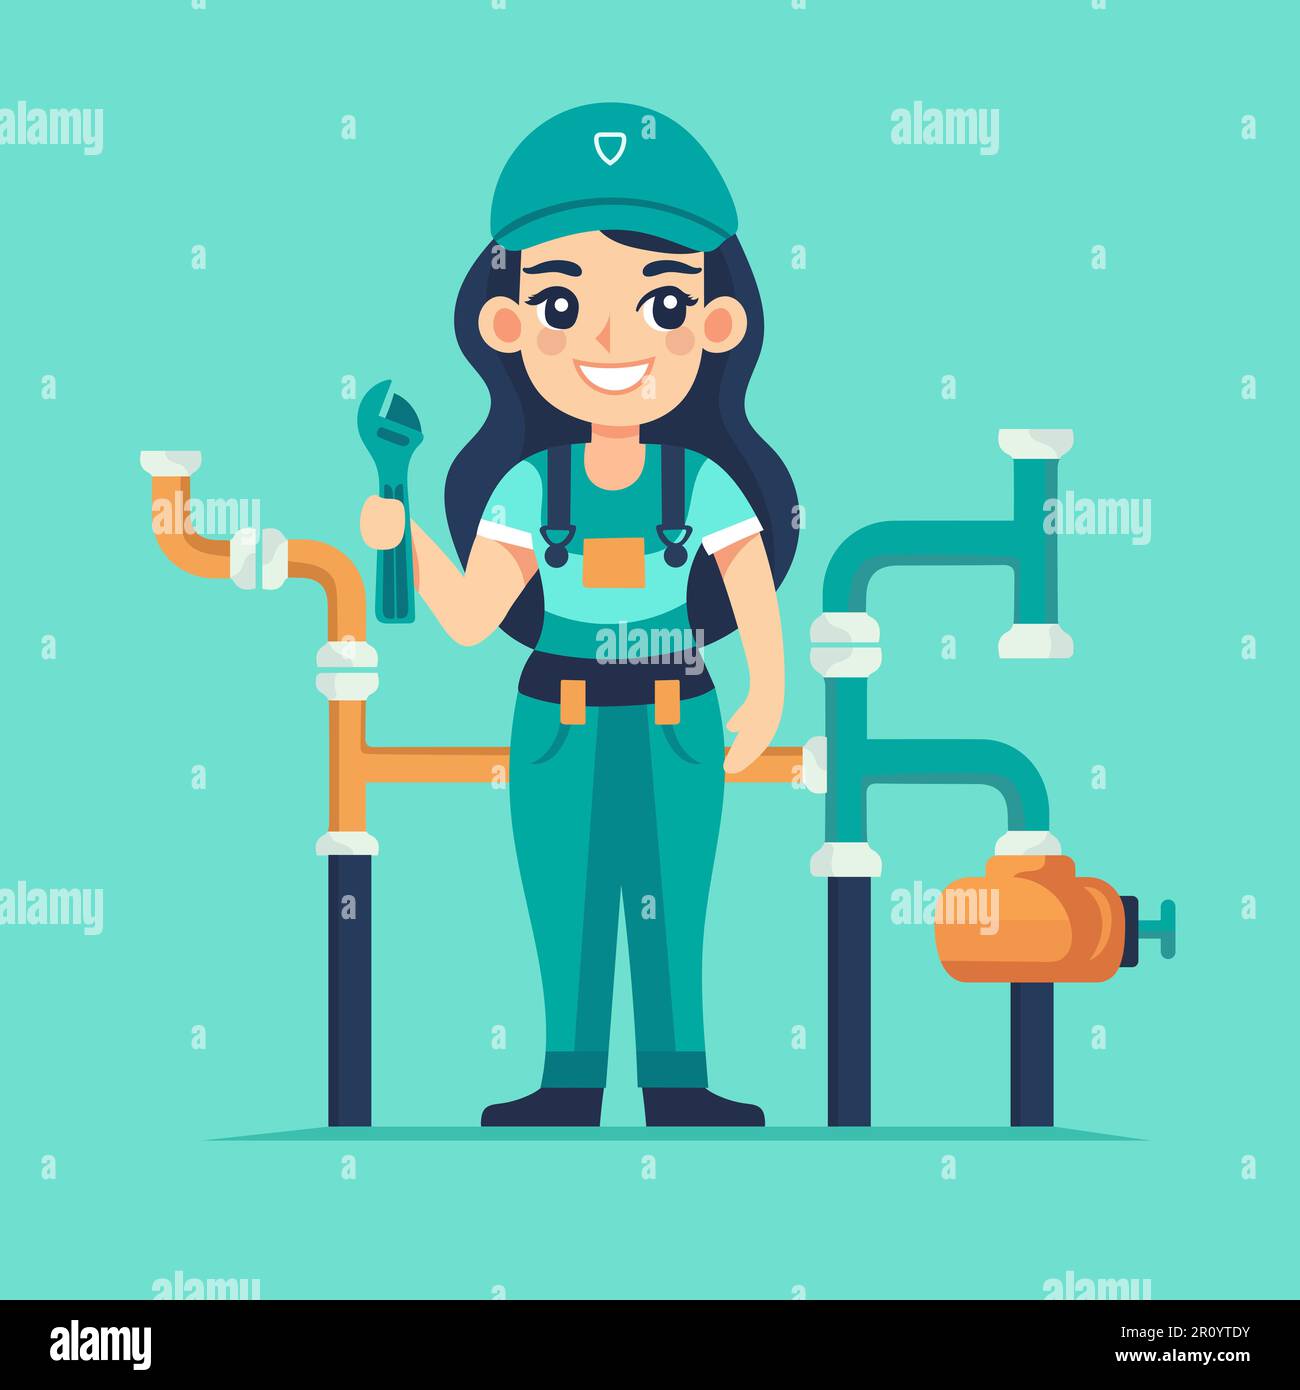 Female plumber. Flat style illustration of plumber woman in workwear. Concept of woman at work Stock Vector